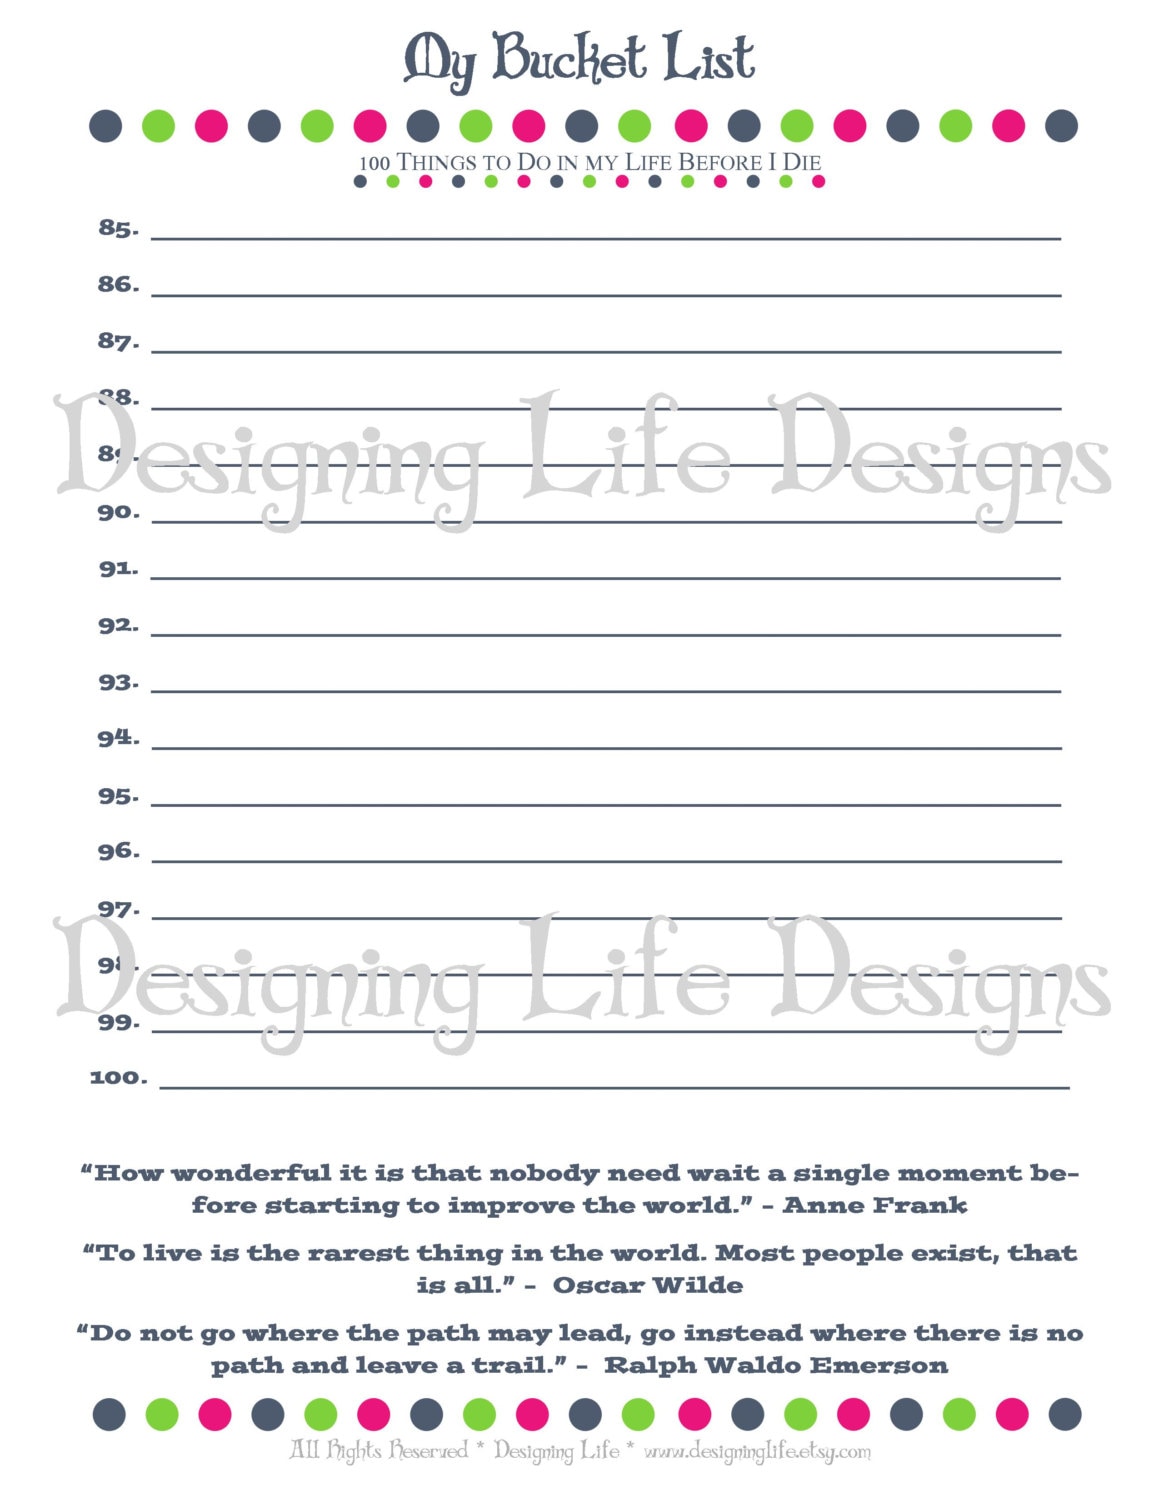 Bucket List Printable with Worksheet Make a plan to live